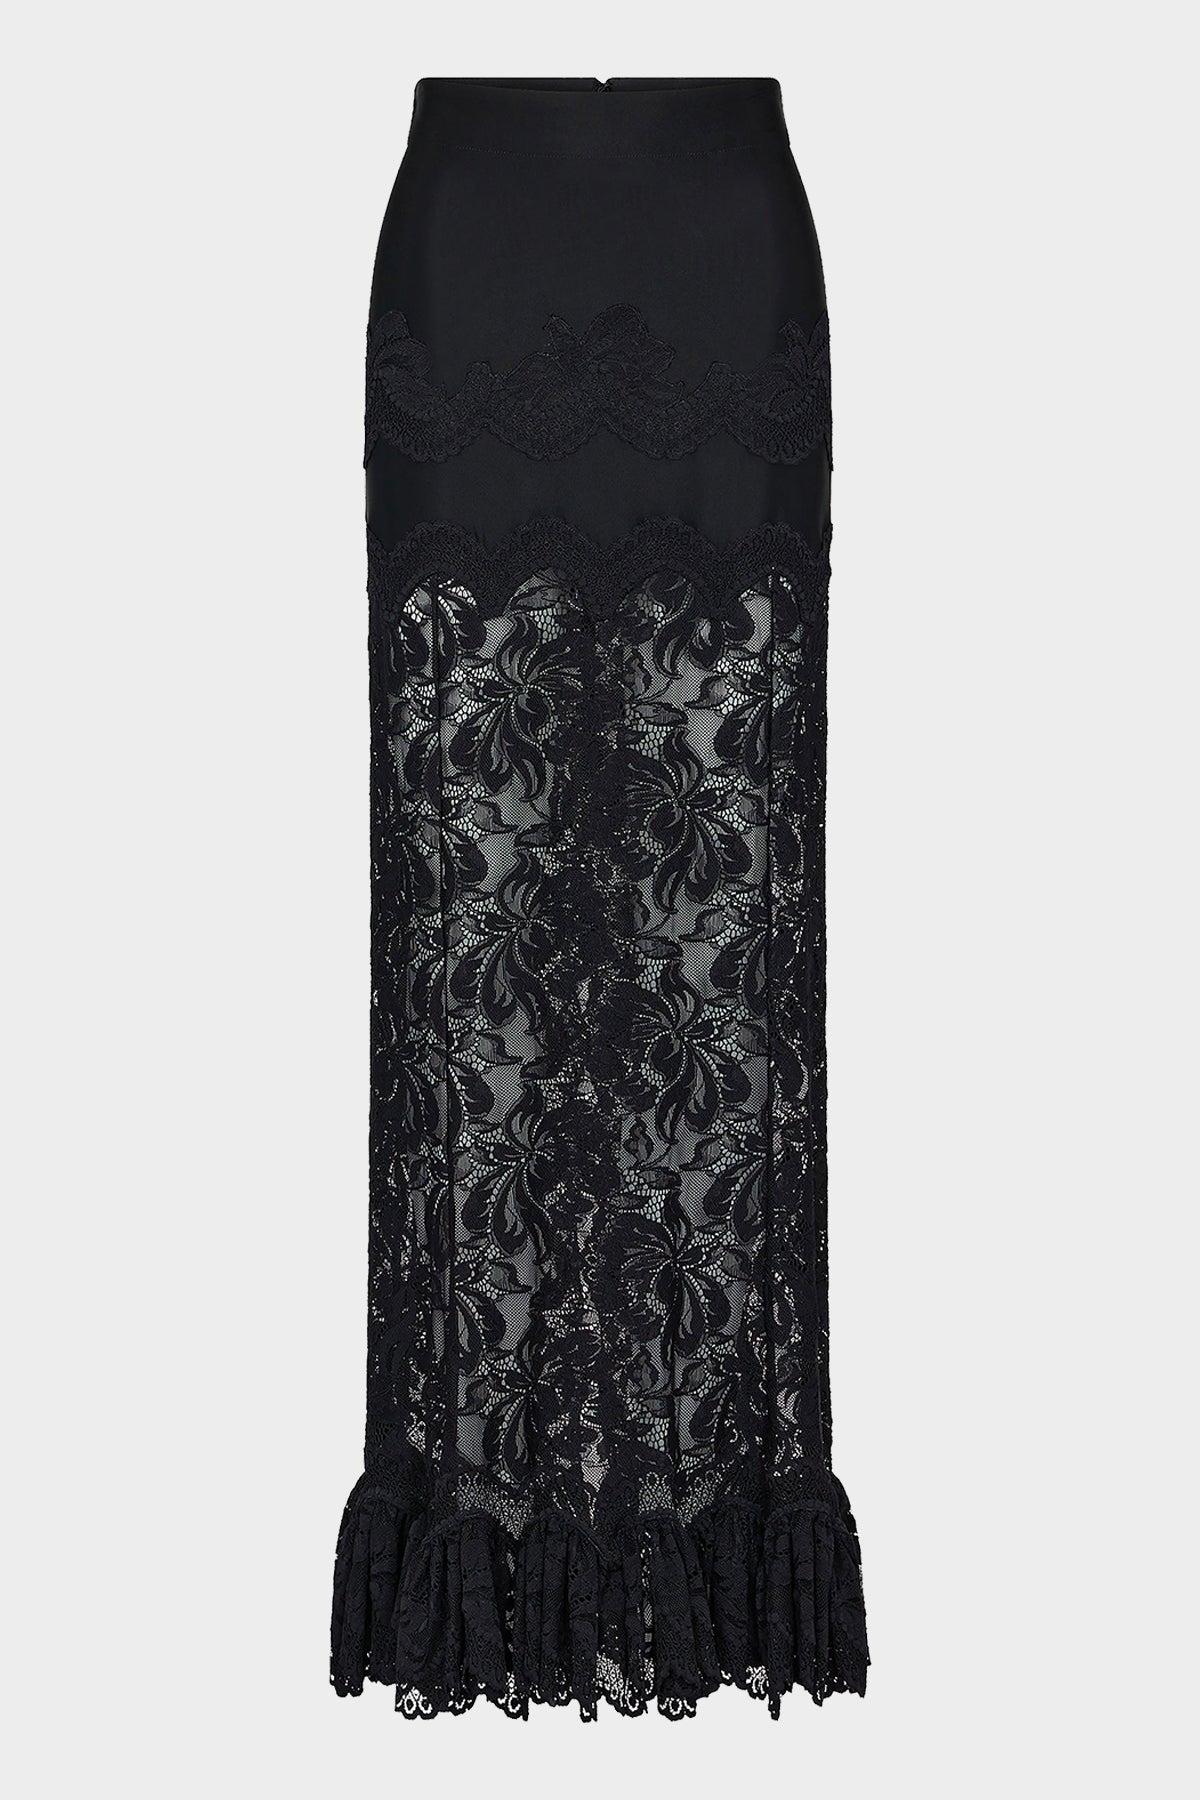 Paco Rabanne Floral Lace Midi Skirt In Black | Lyst